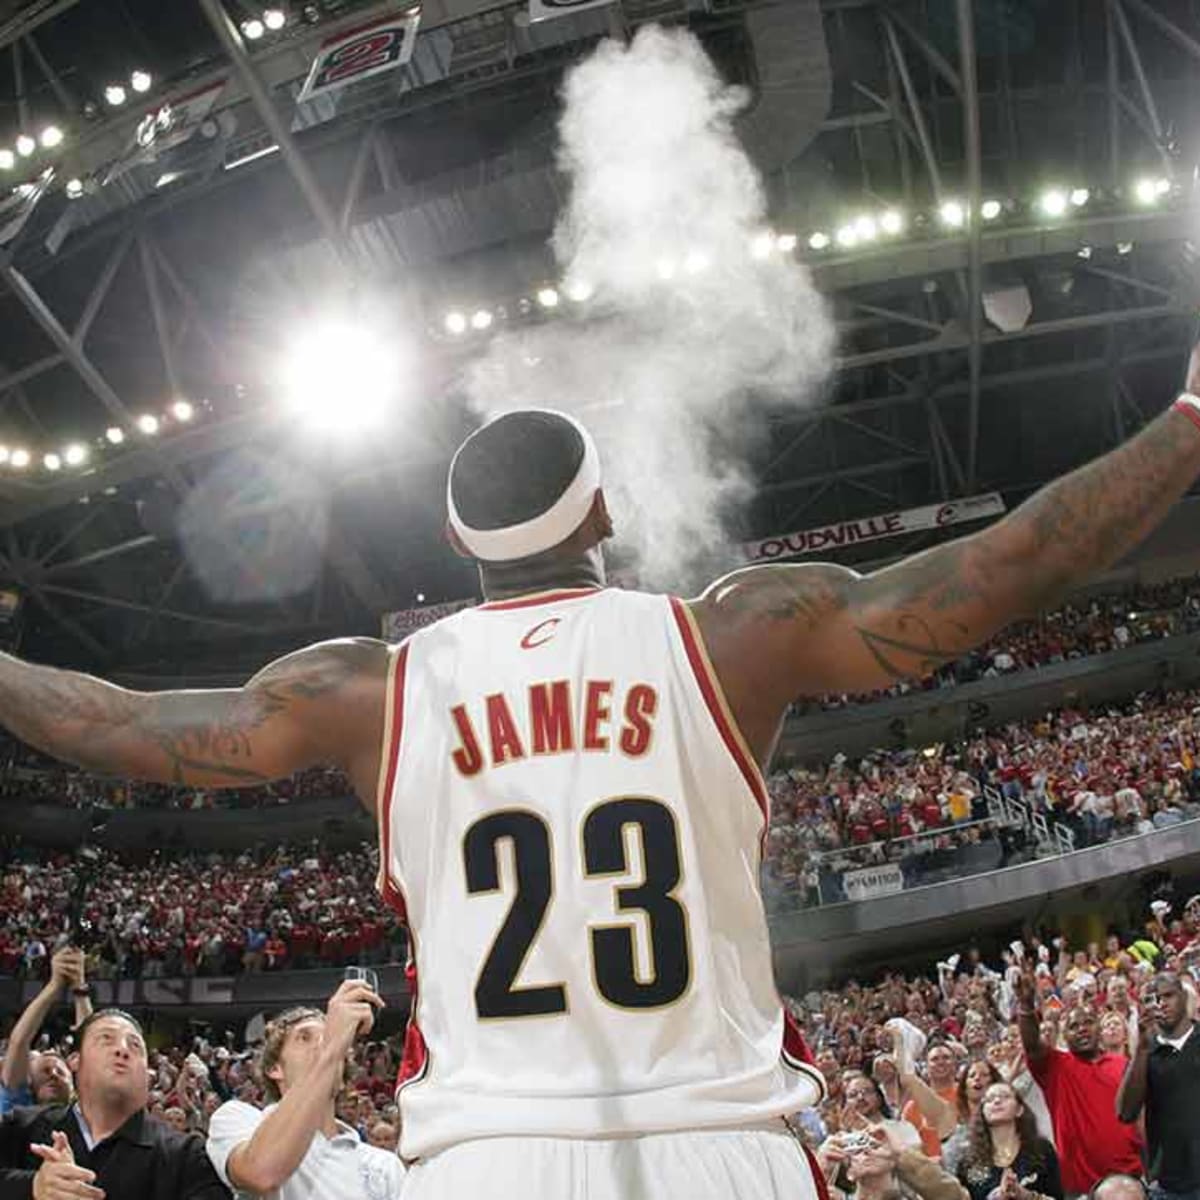 Legendary Moments In NBA History: LeBron James decides to join